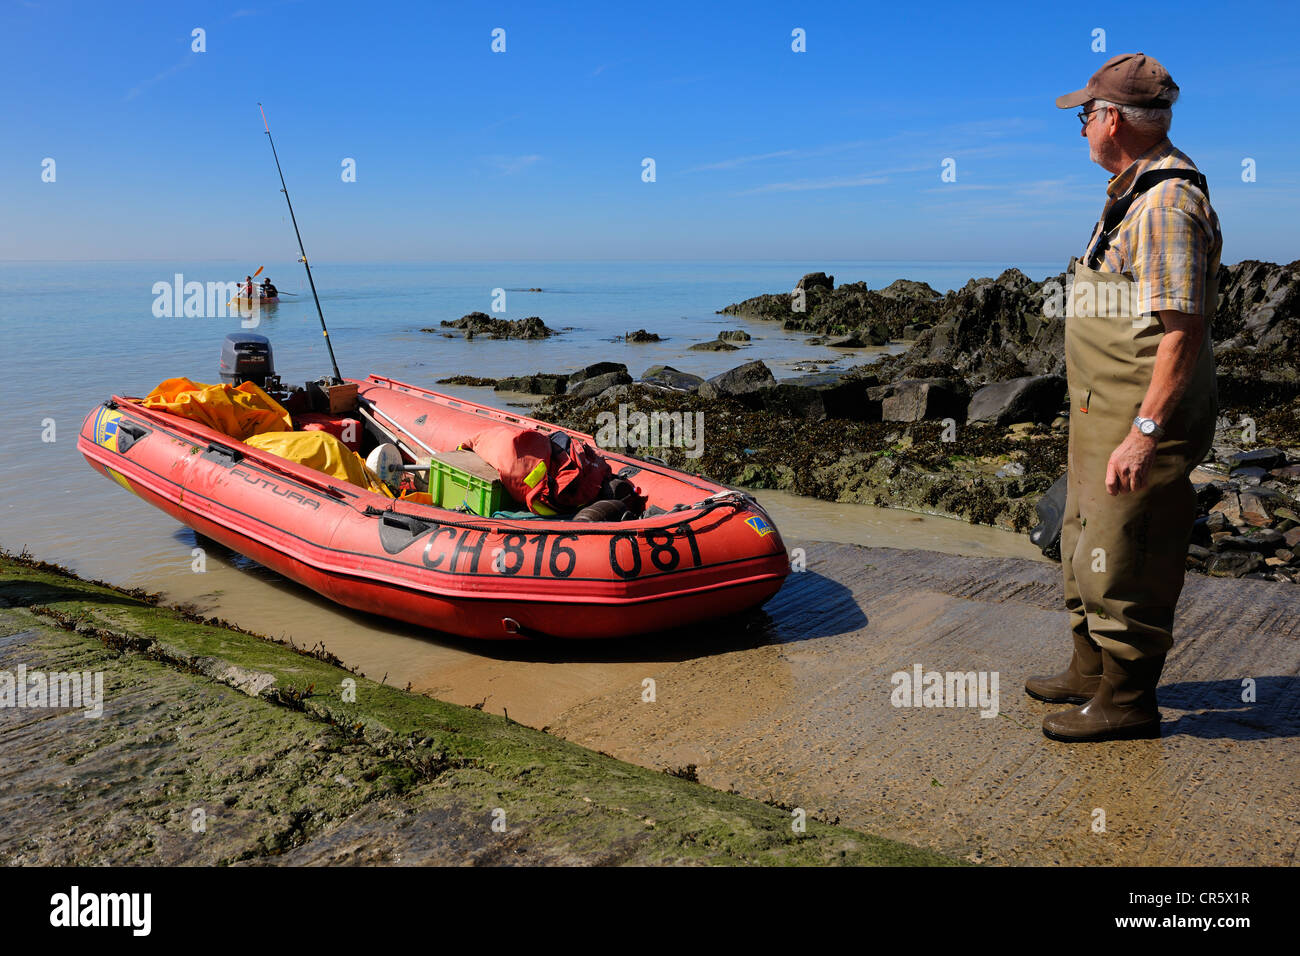 France, Manche, Bay of Mont Saint Michel, fisherman looking at the arrival of a kayak Stock Photo